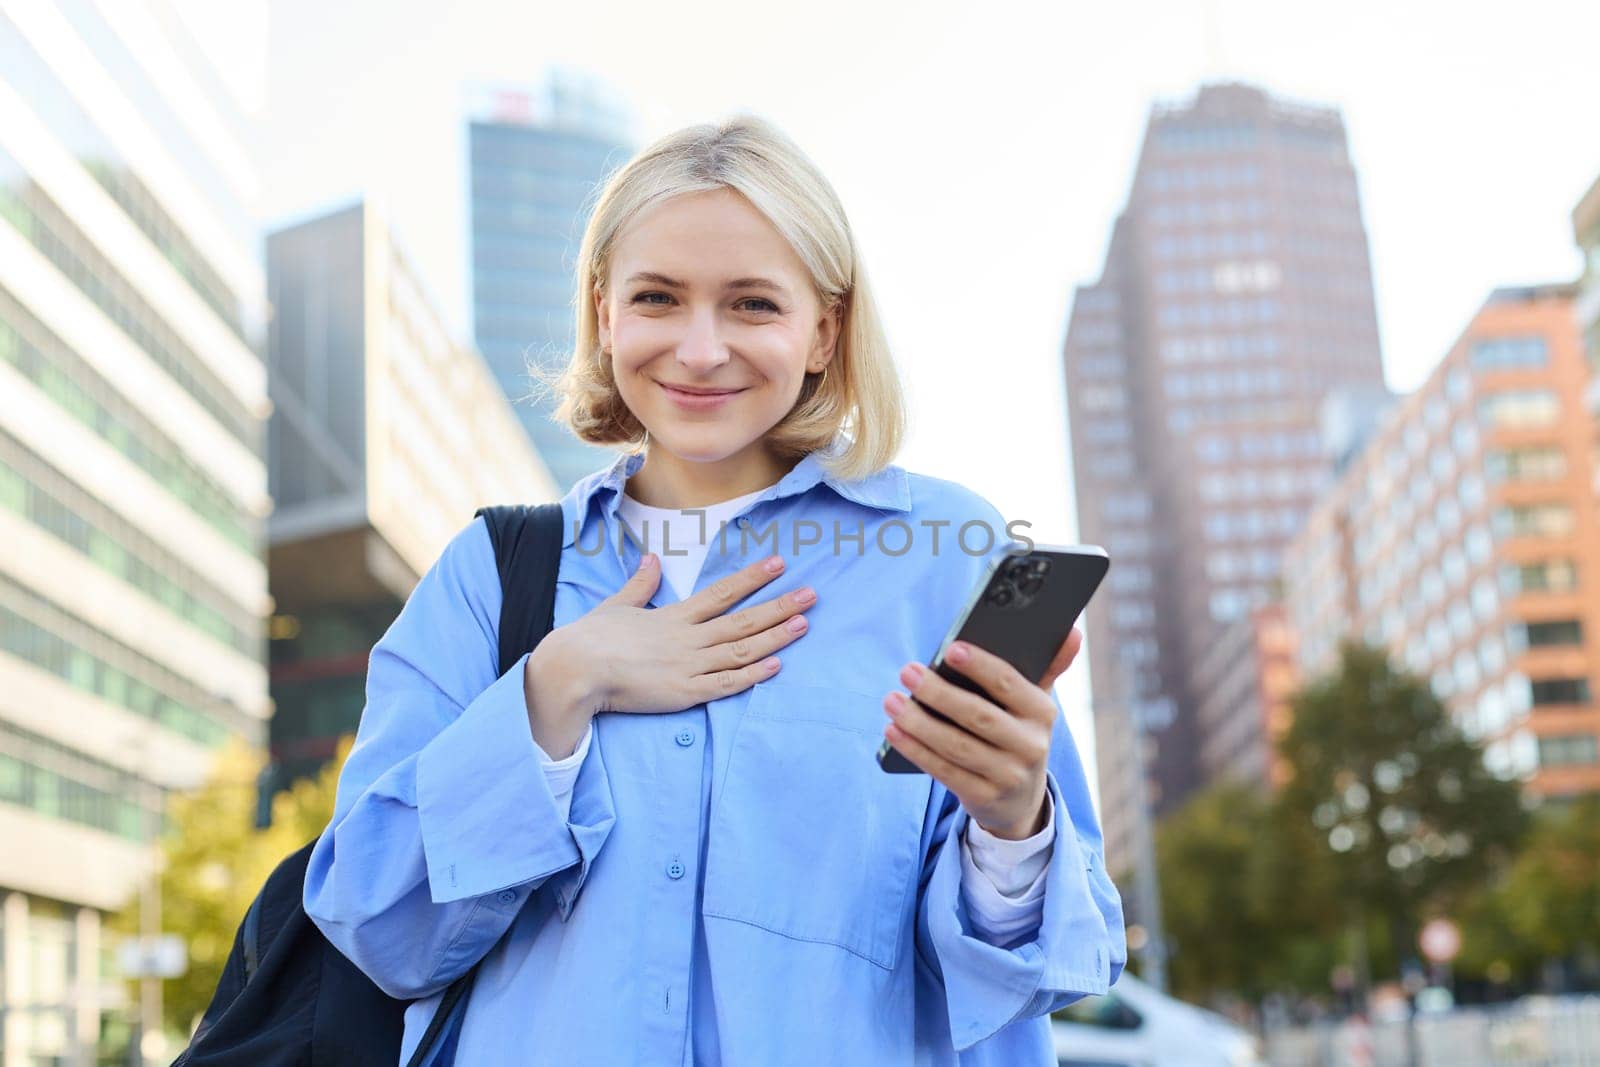 Image of young professional, office manager woman with backpack and smartphone, posing on streets of busy city, holding hand on chest, smiling and looking excited at camera.